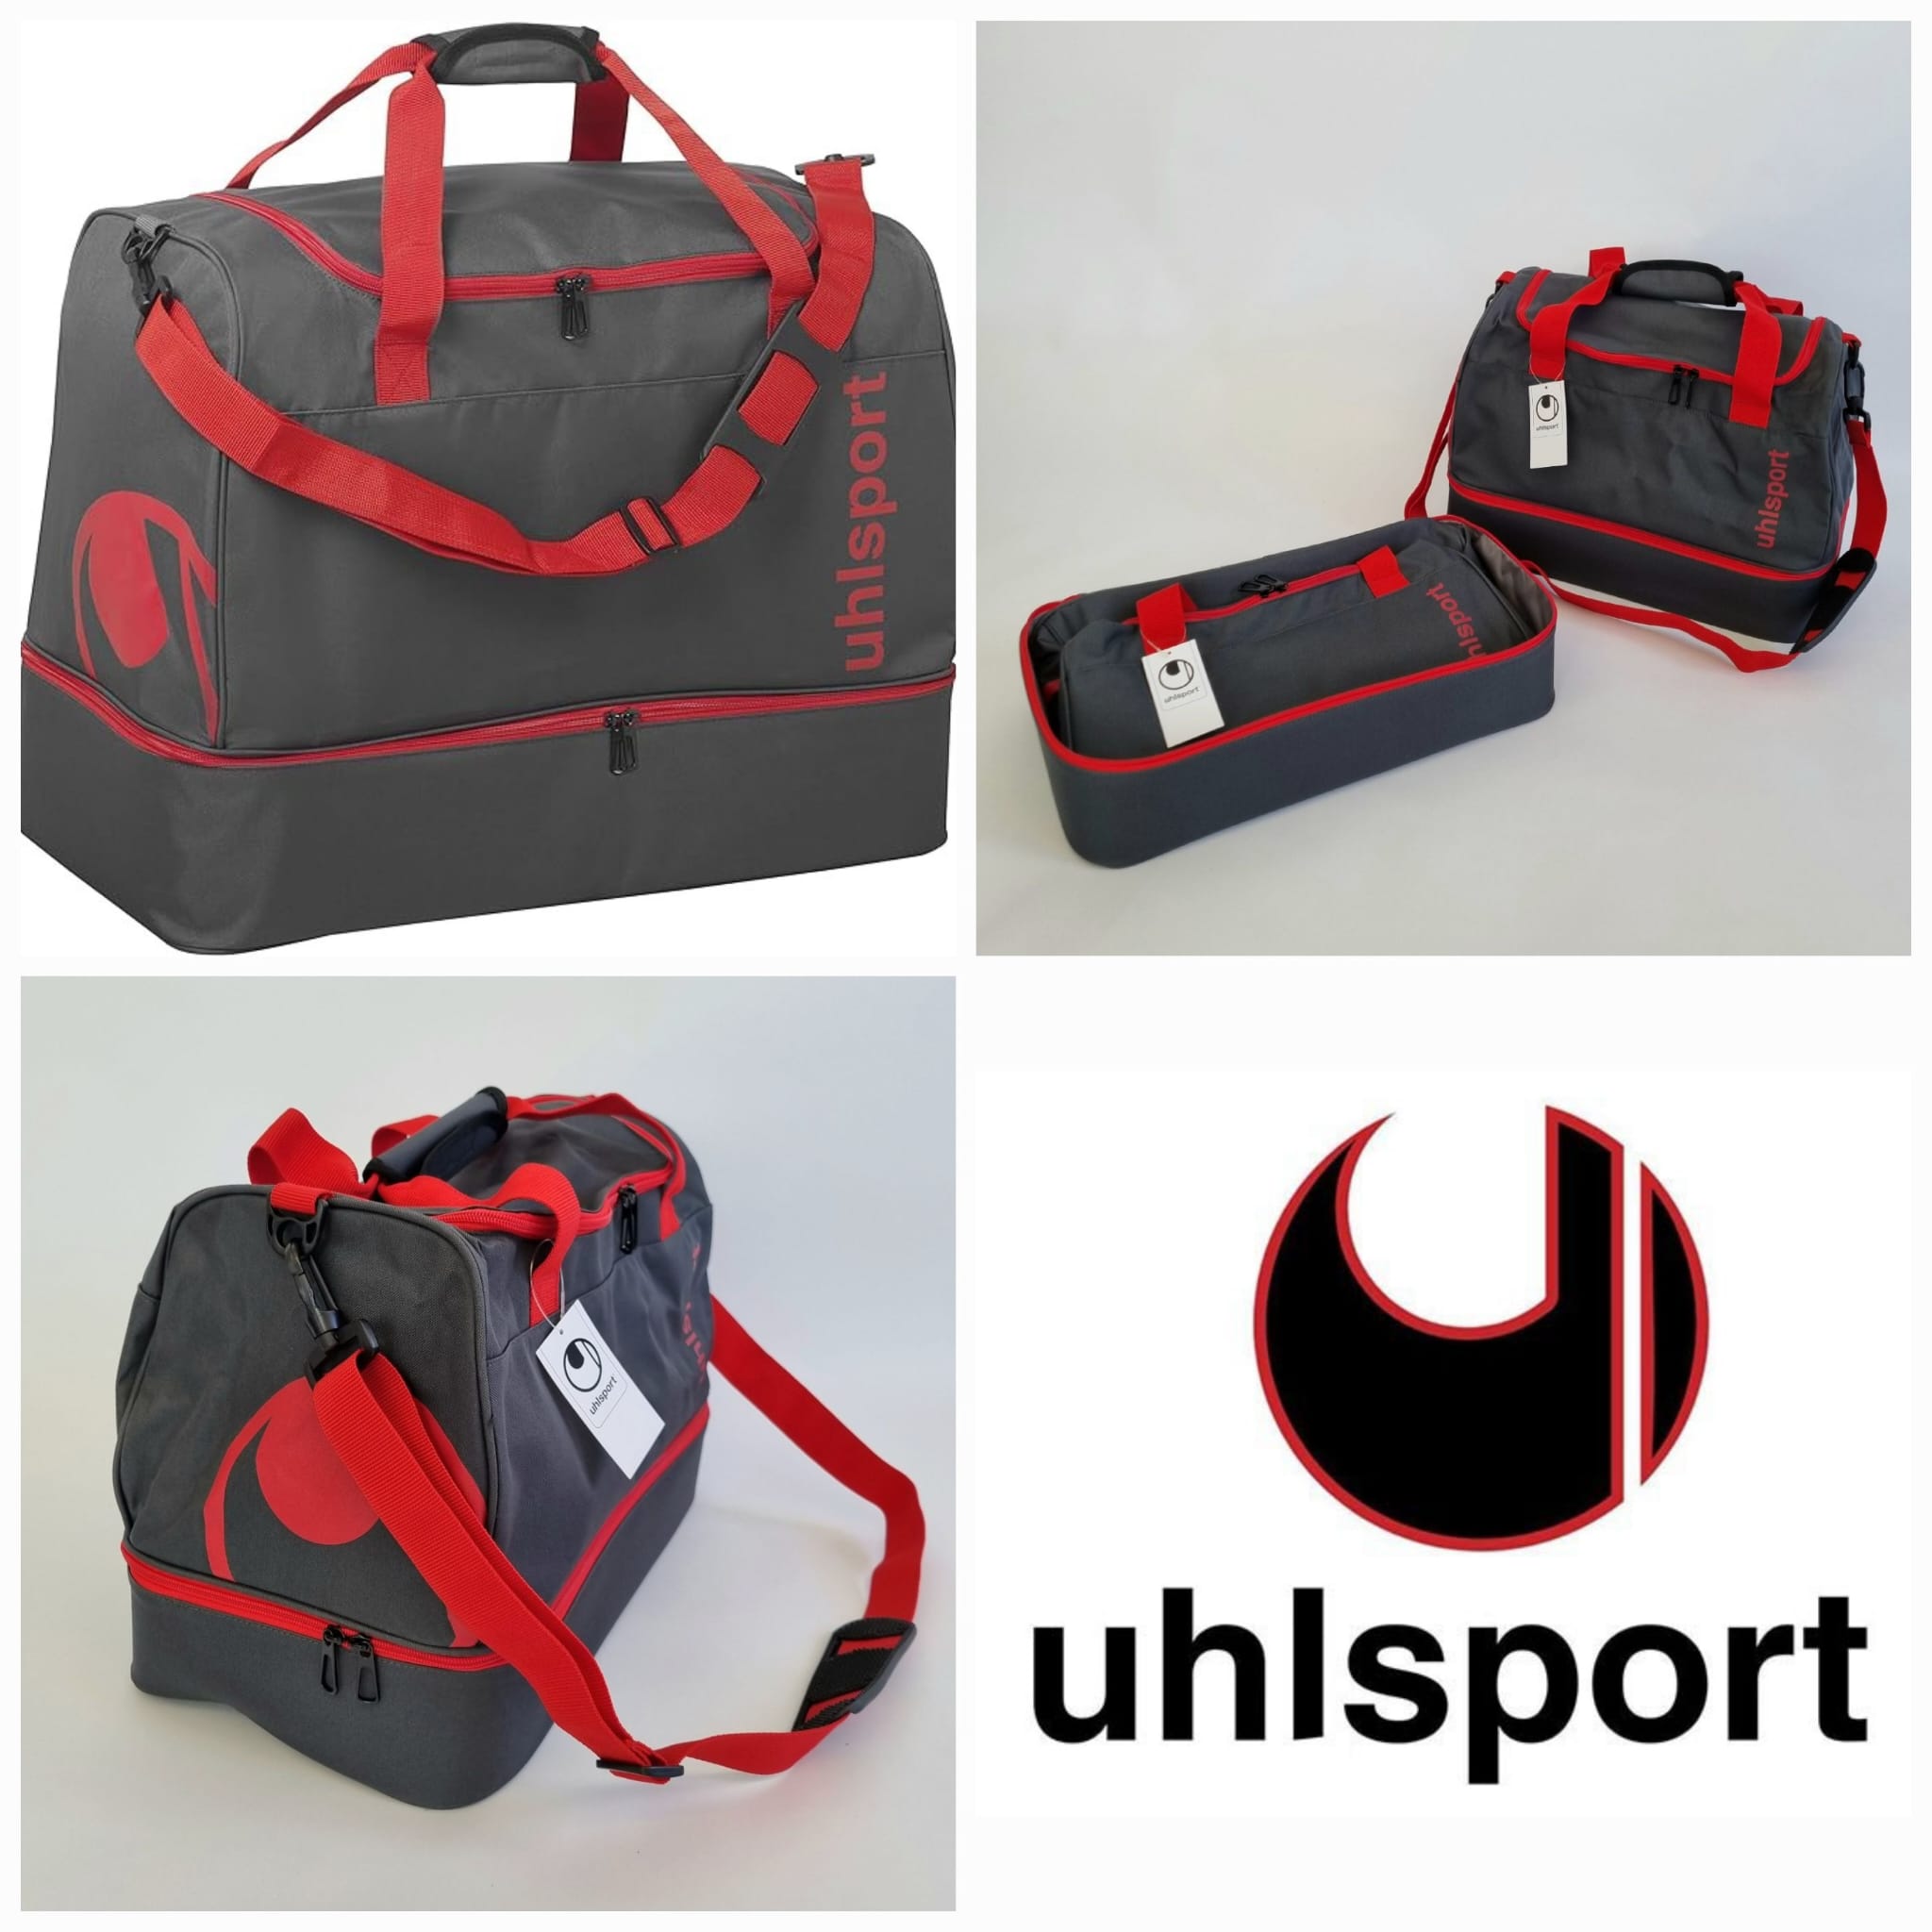 Sports bags from Uhlsport